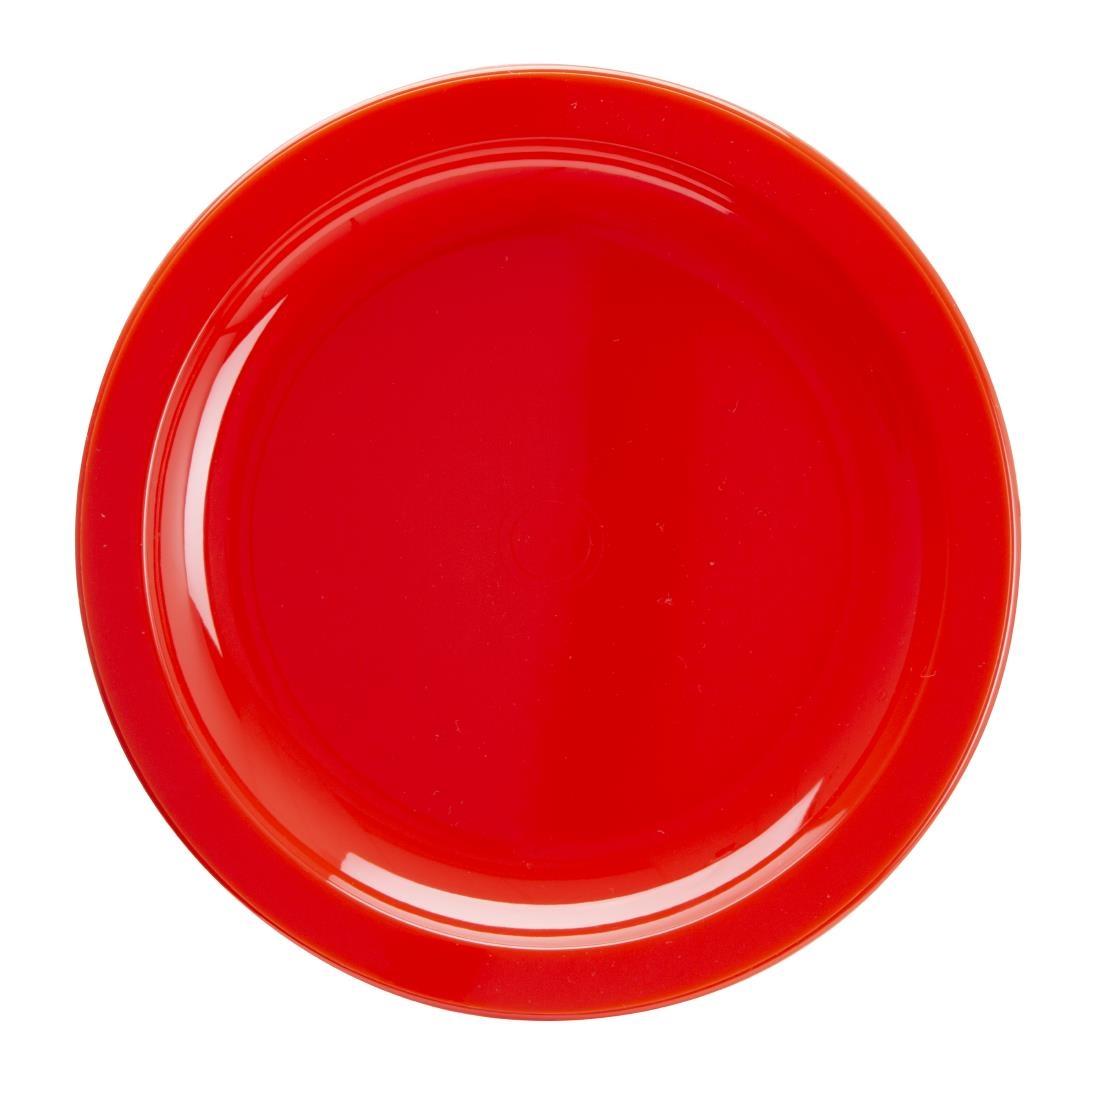 Olympia Kristallon Polycarbonate Plates Red 172mm (Pack of 12) - CB766  - 1